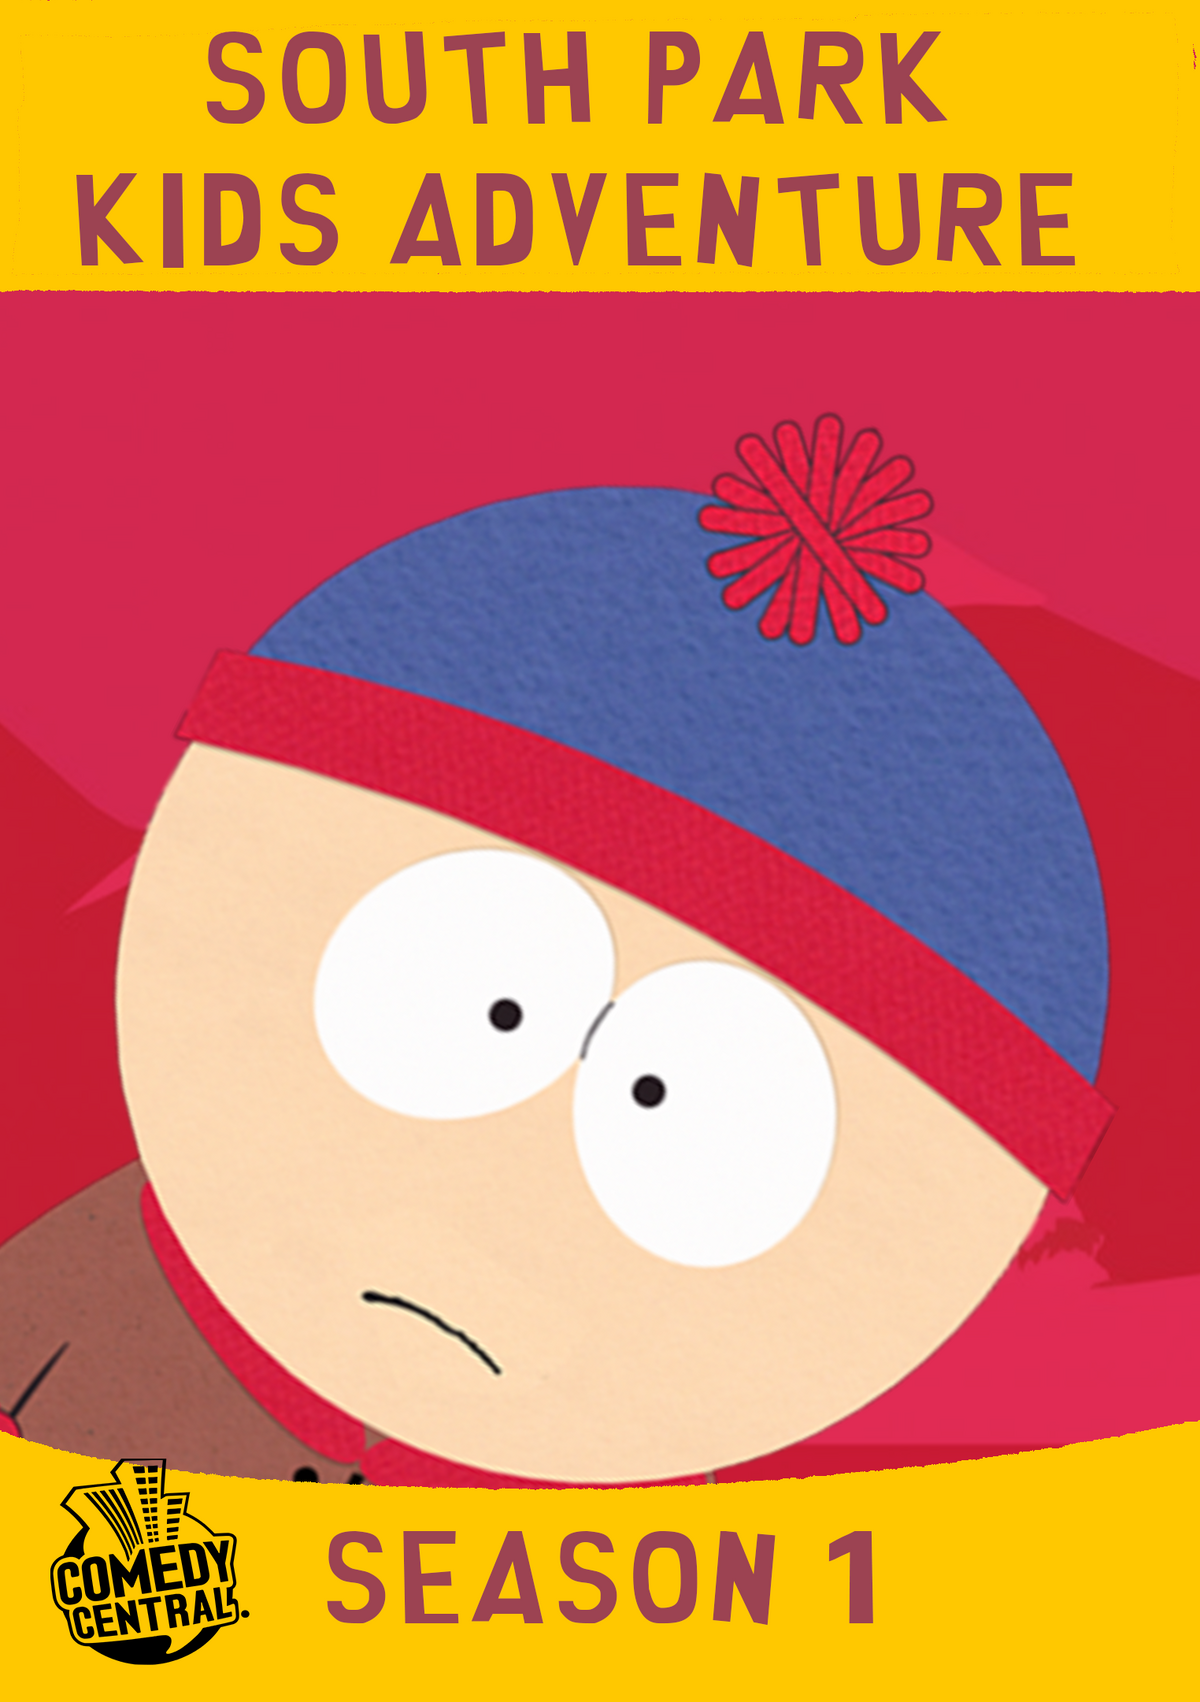 https://static.wikia.nocookie.net/southparkfanon/images/f/f1/SouthParkKidsAdventureSeason1DVDCover.png/revision/latest/scale-to-width-down/1200?cb=20190313054727